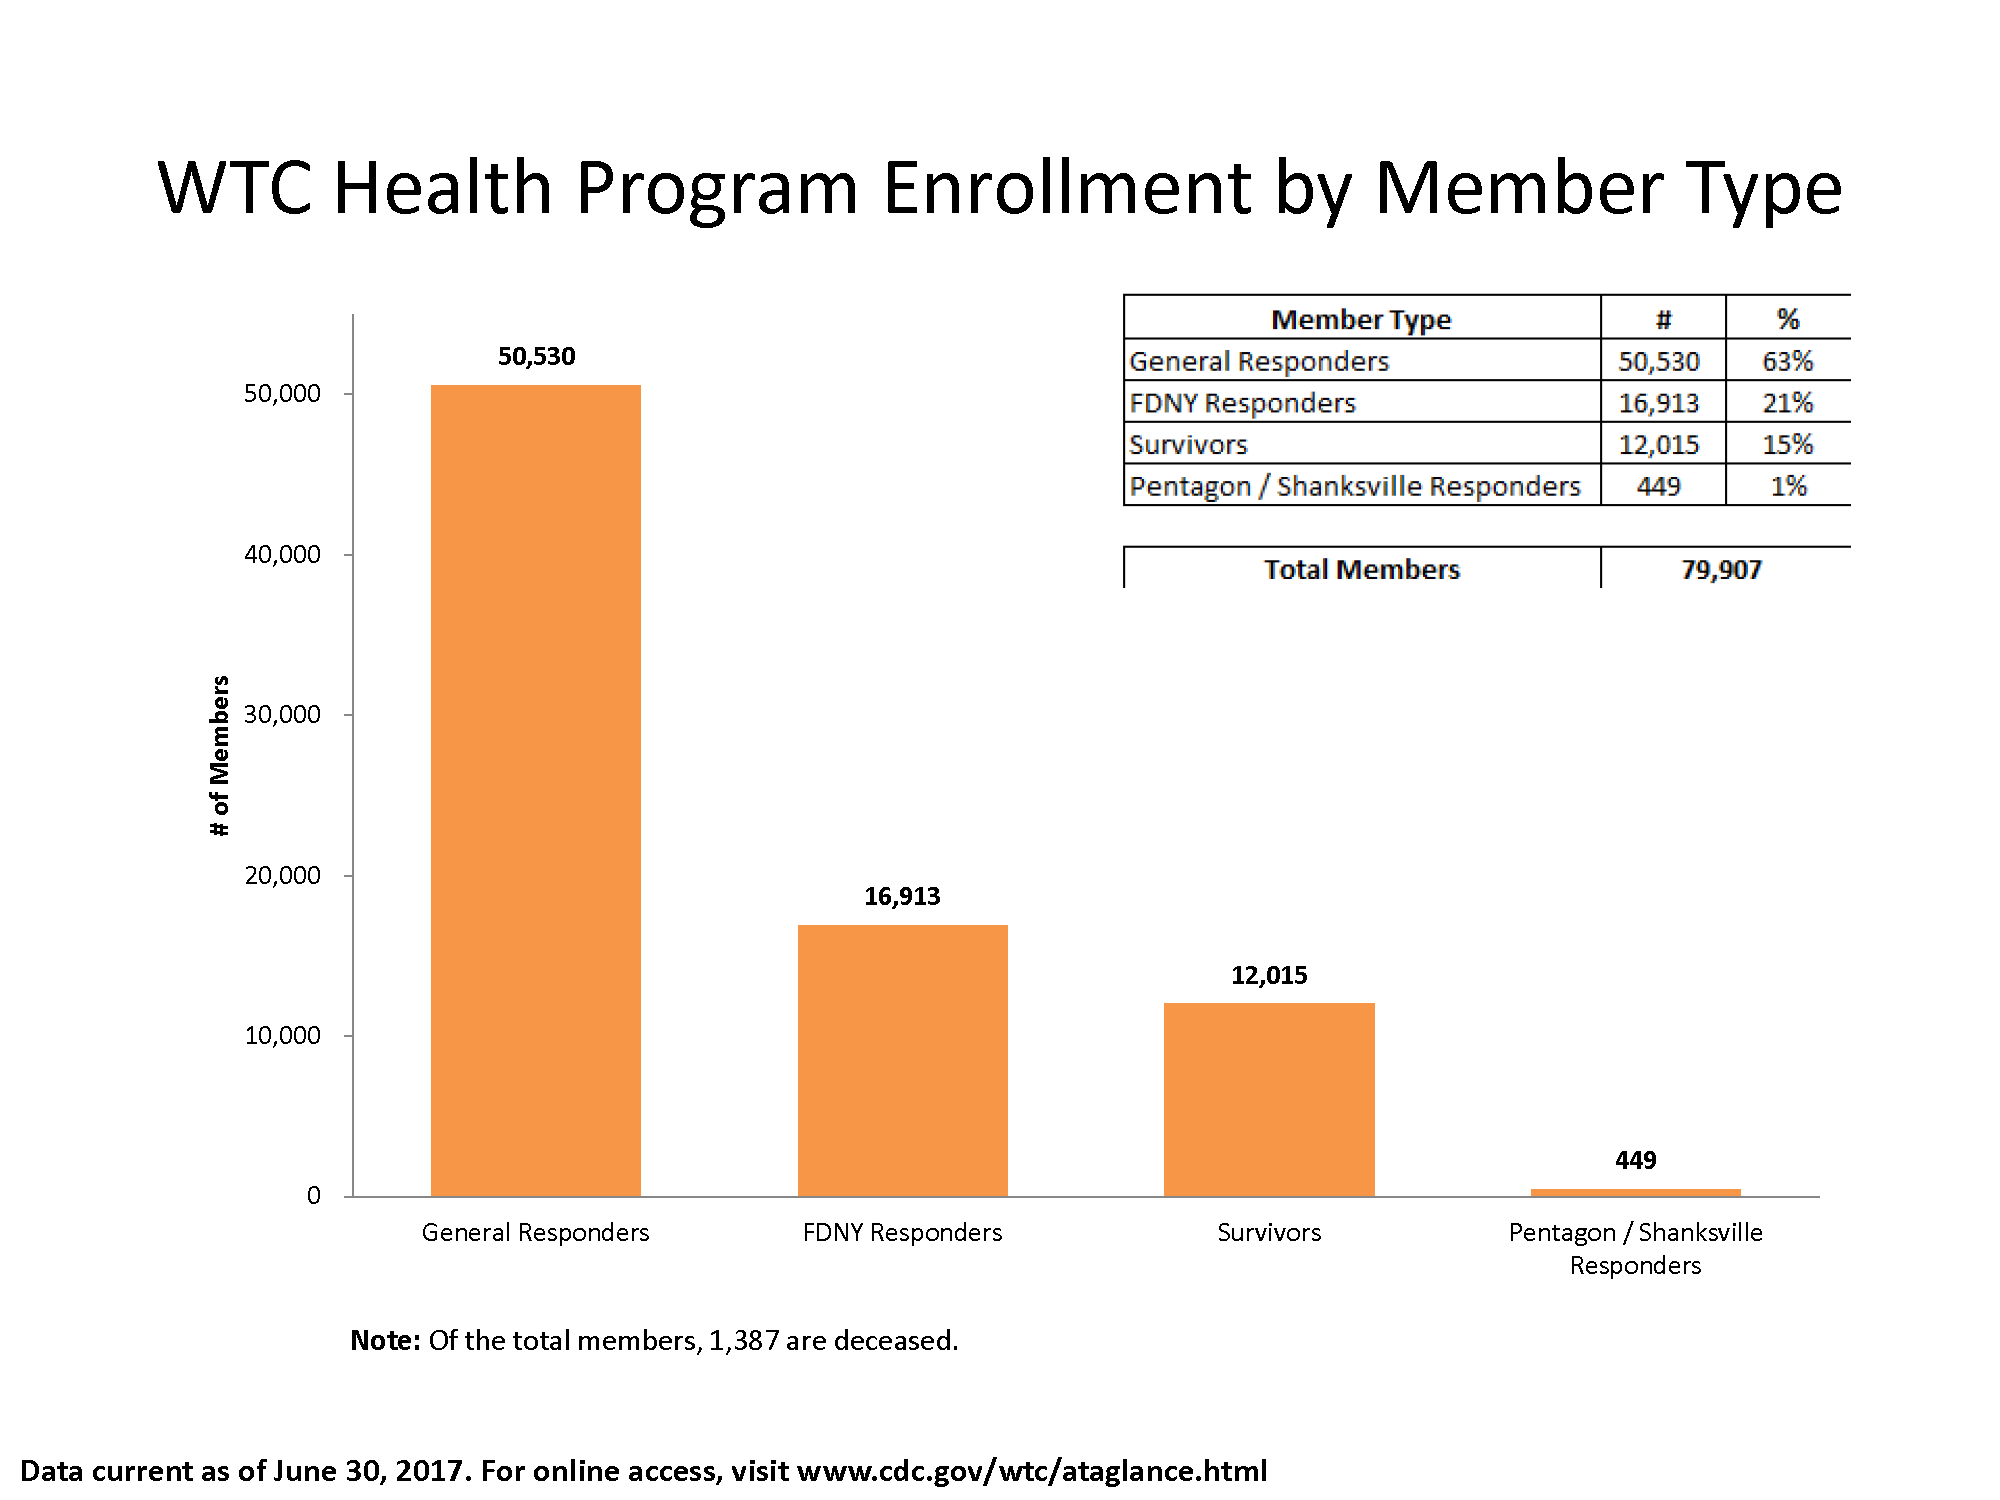 Bar chart of data in table showing enrollment by member type.